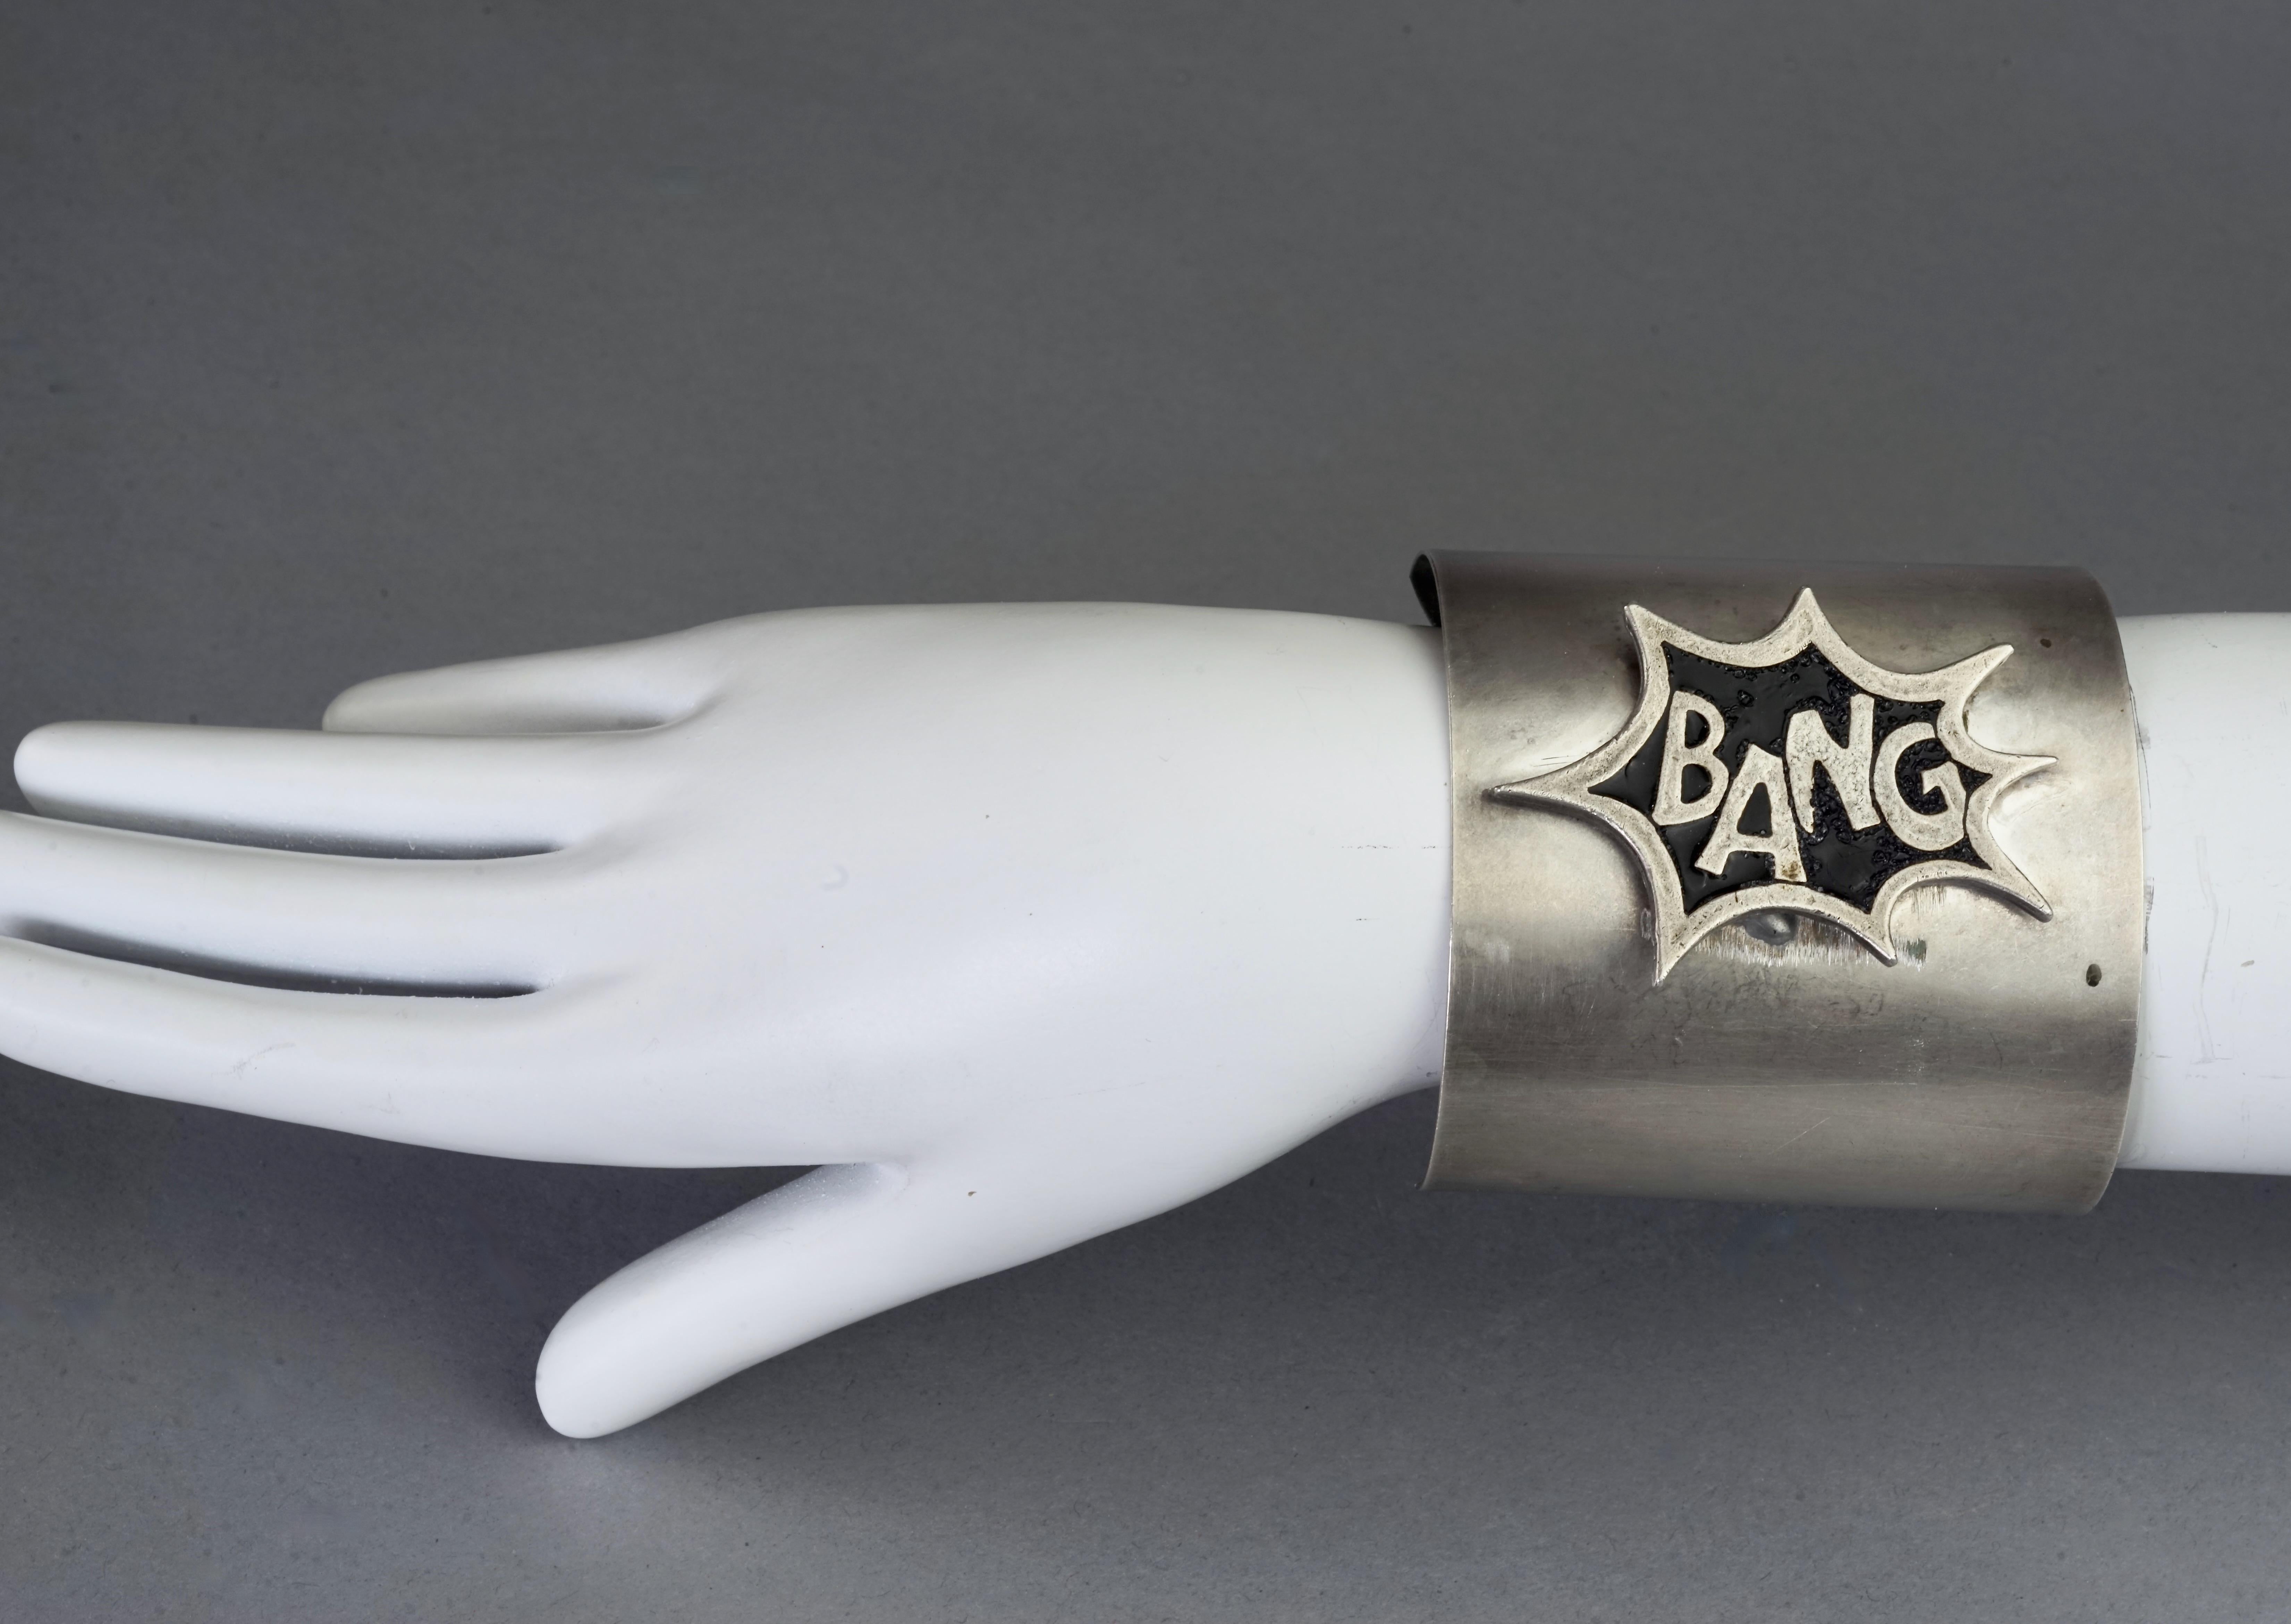 Vintage JEAN PAUL GAULTIER Cartoon Explosion Bang Enamel Silver Cuff Bracelet

Measurements:
Height: 2.56 inches (6.5 cm)
Inner Circumference: 6.30 inches (16 cm) opening included

Features:
- 100% Authentic JEAN PAUL GAULTIER.
- Silver cuff